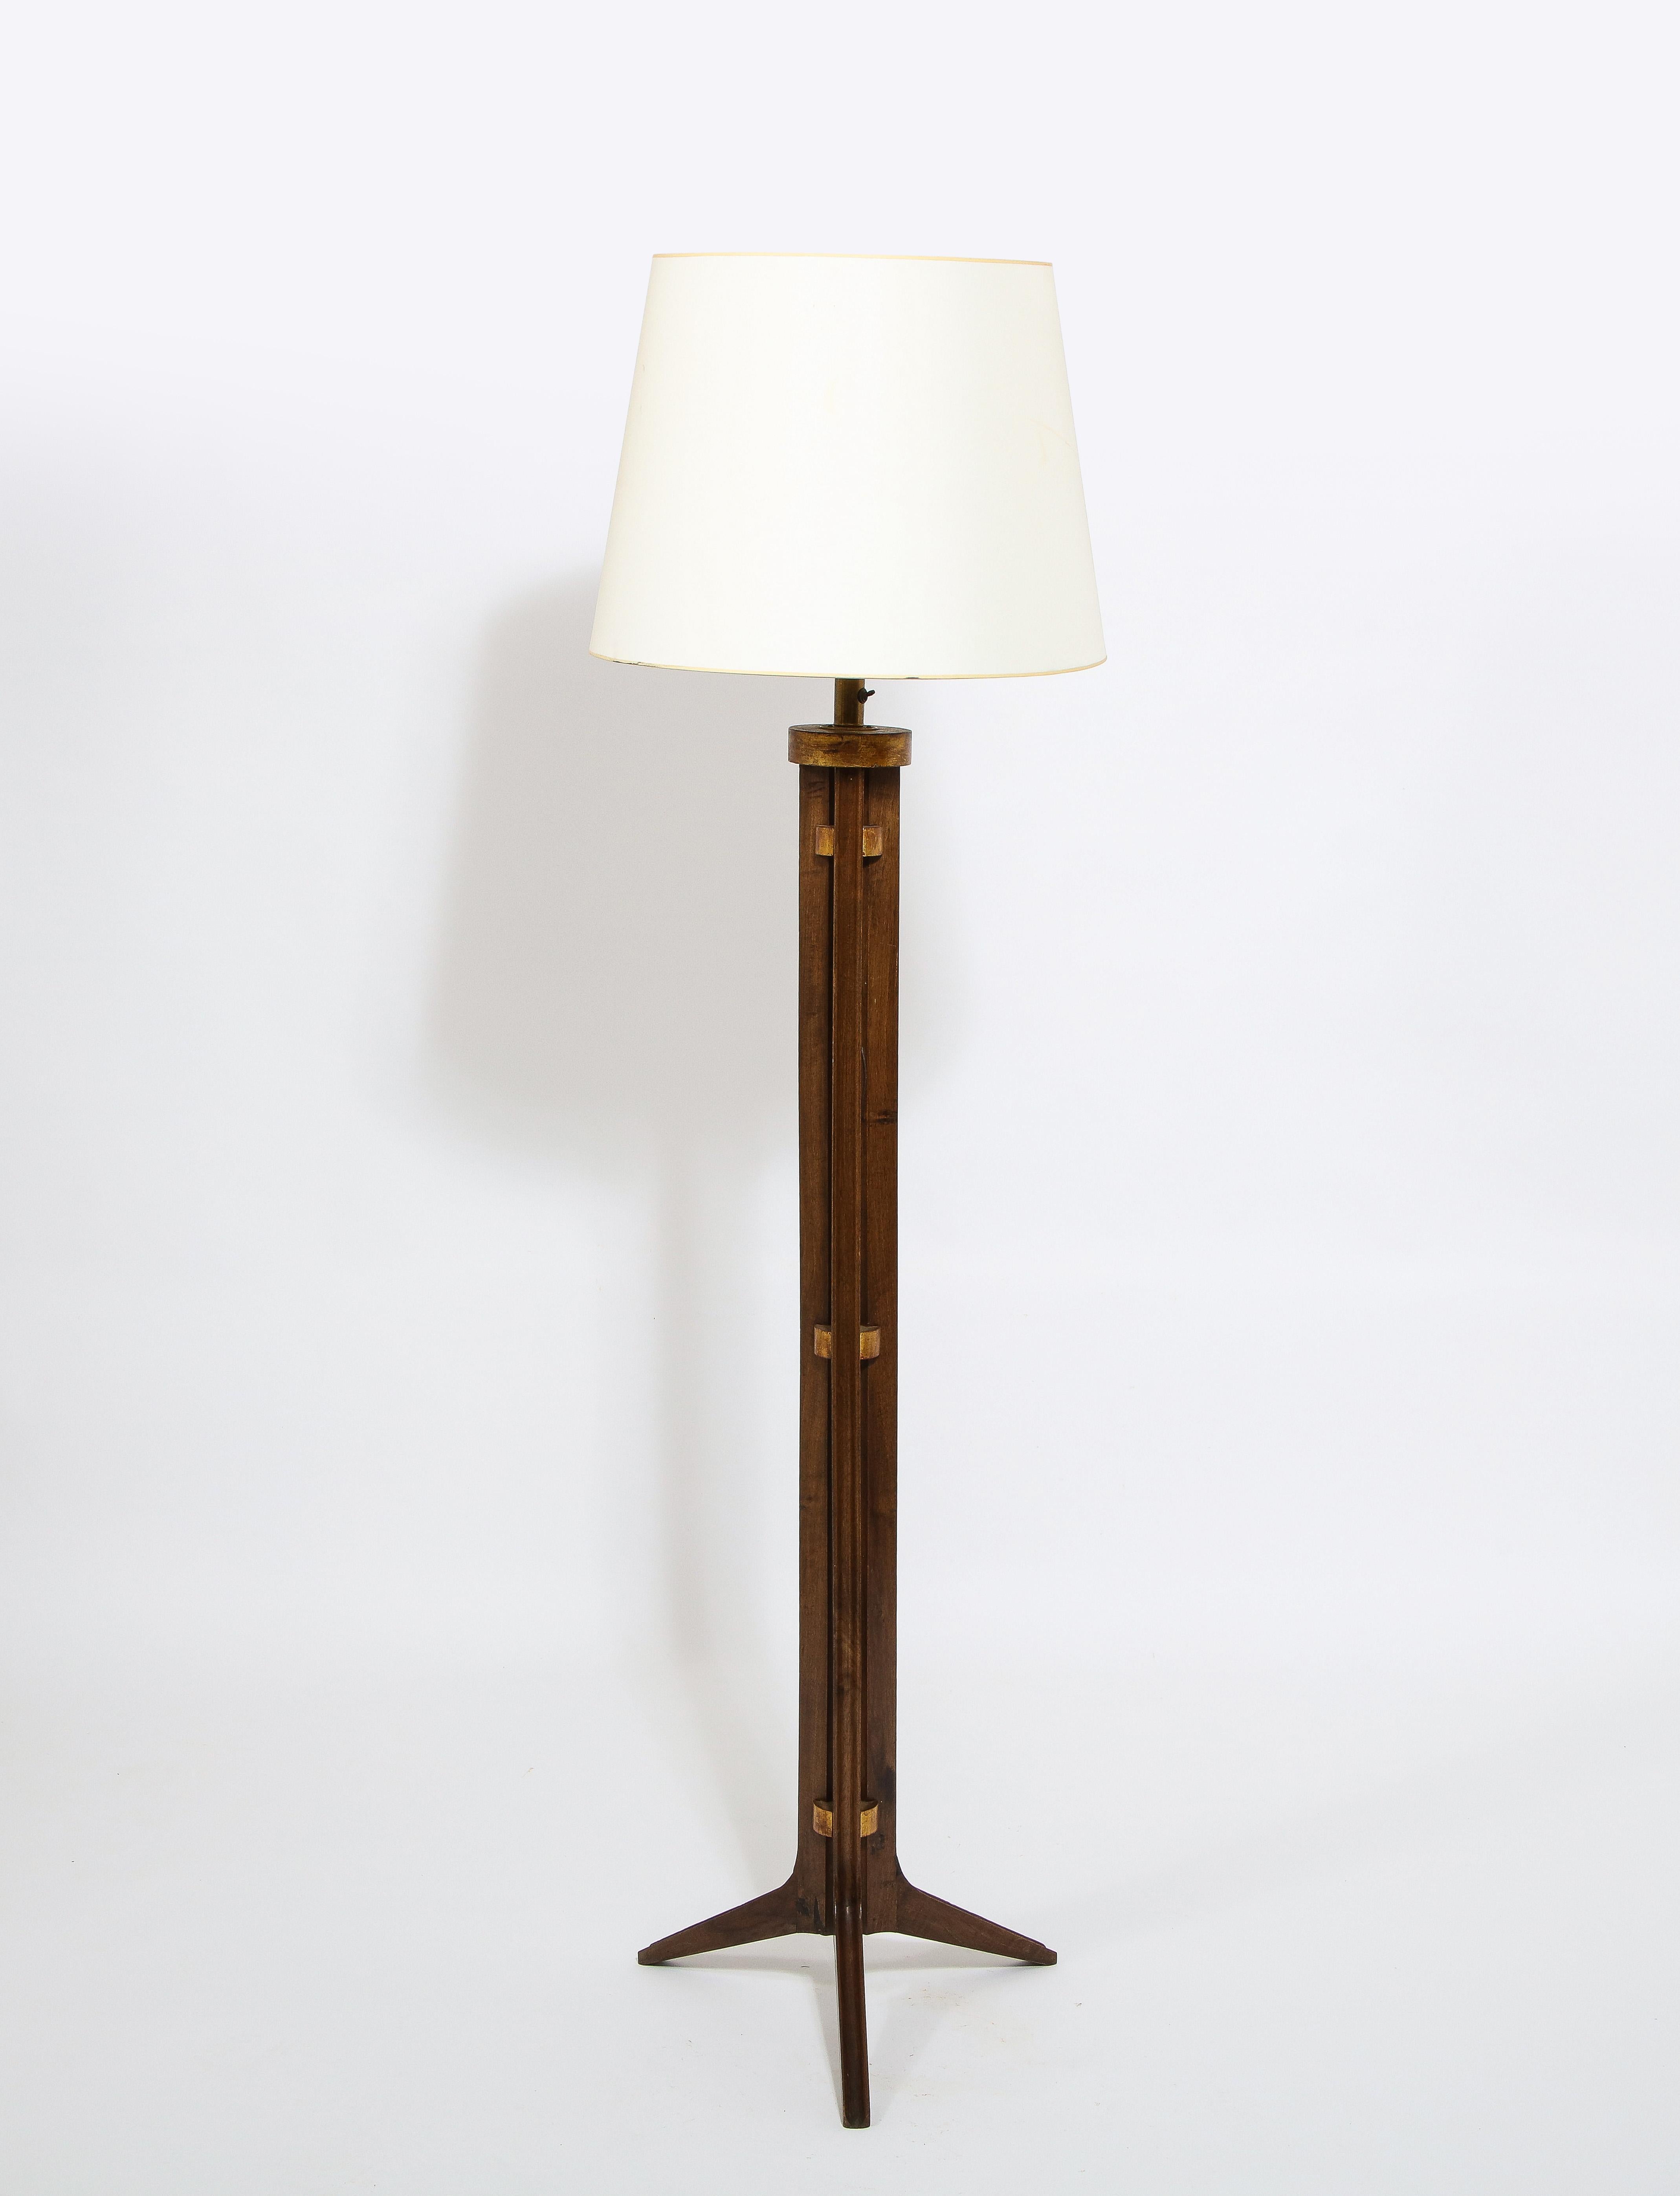 Walnut Tripod Floor Lamp with Gilt Accents, France 1960's  For Sale 3